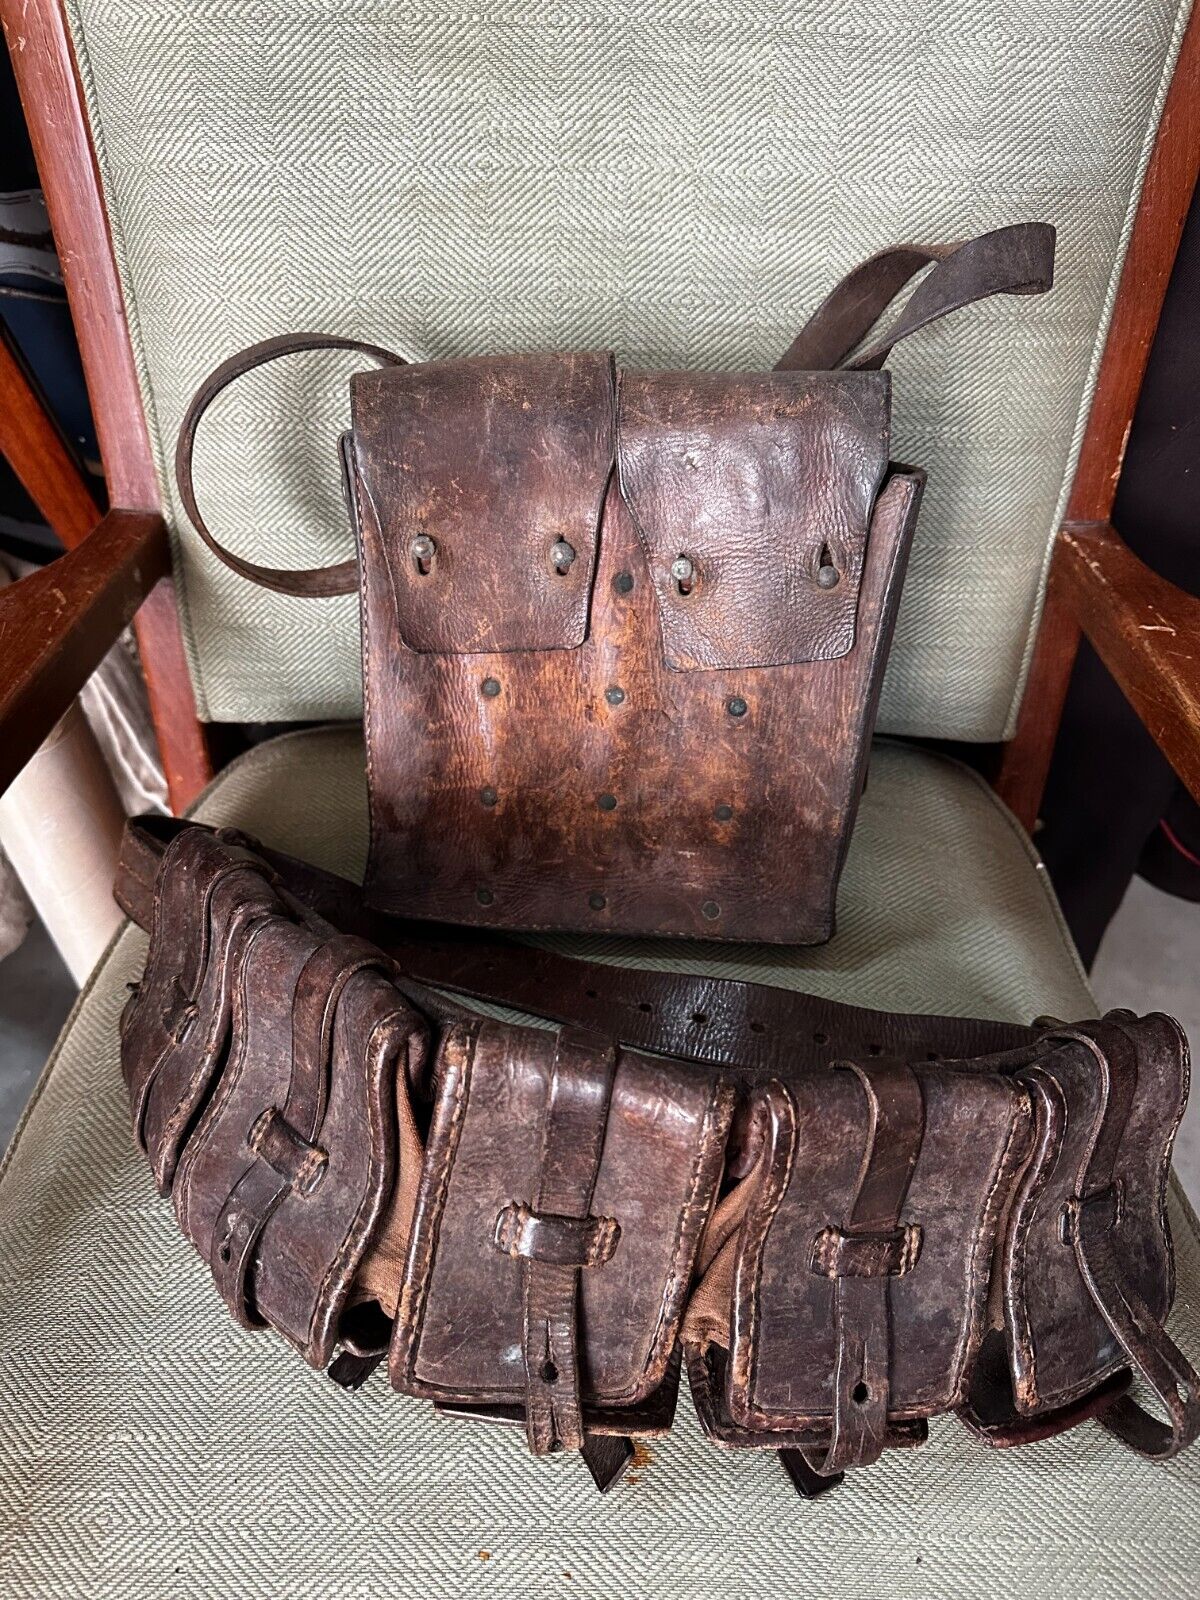 Belt with cartridge belts and leather bag from the 1st World War, I think Swedis